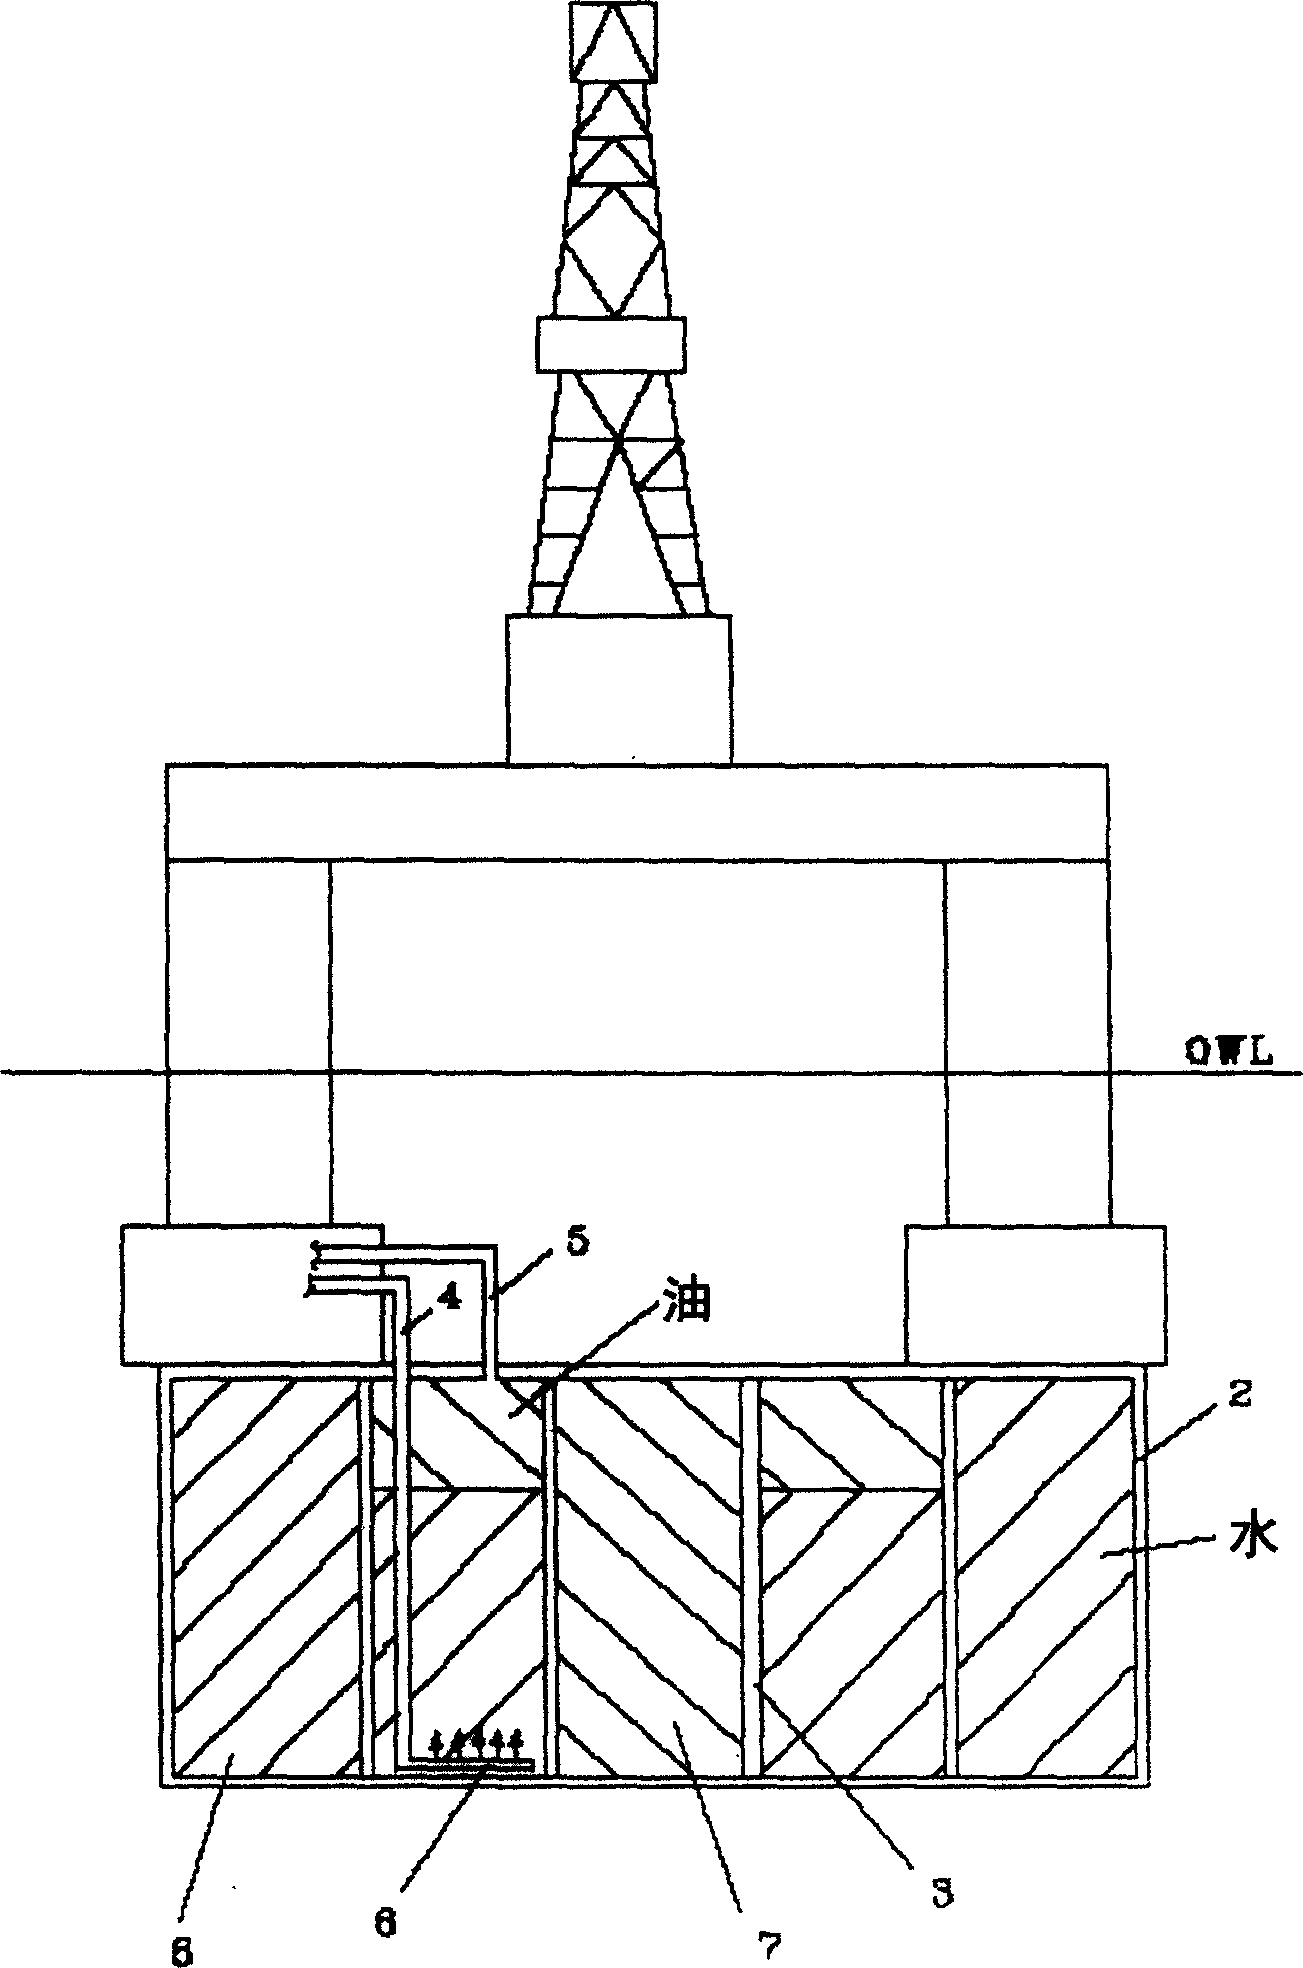 Floating semi-submersible oil production and storage arrangement